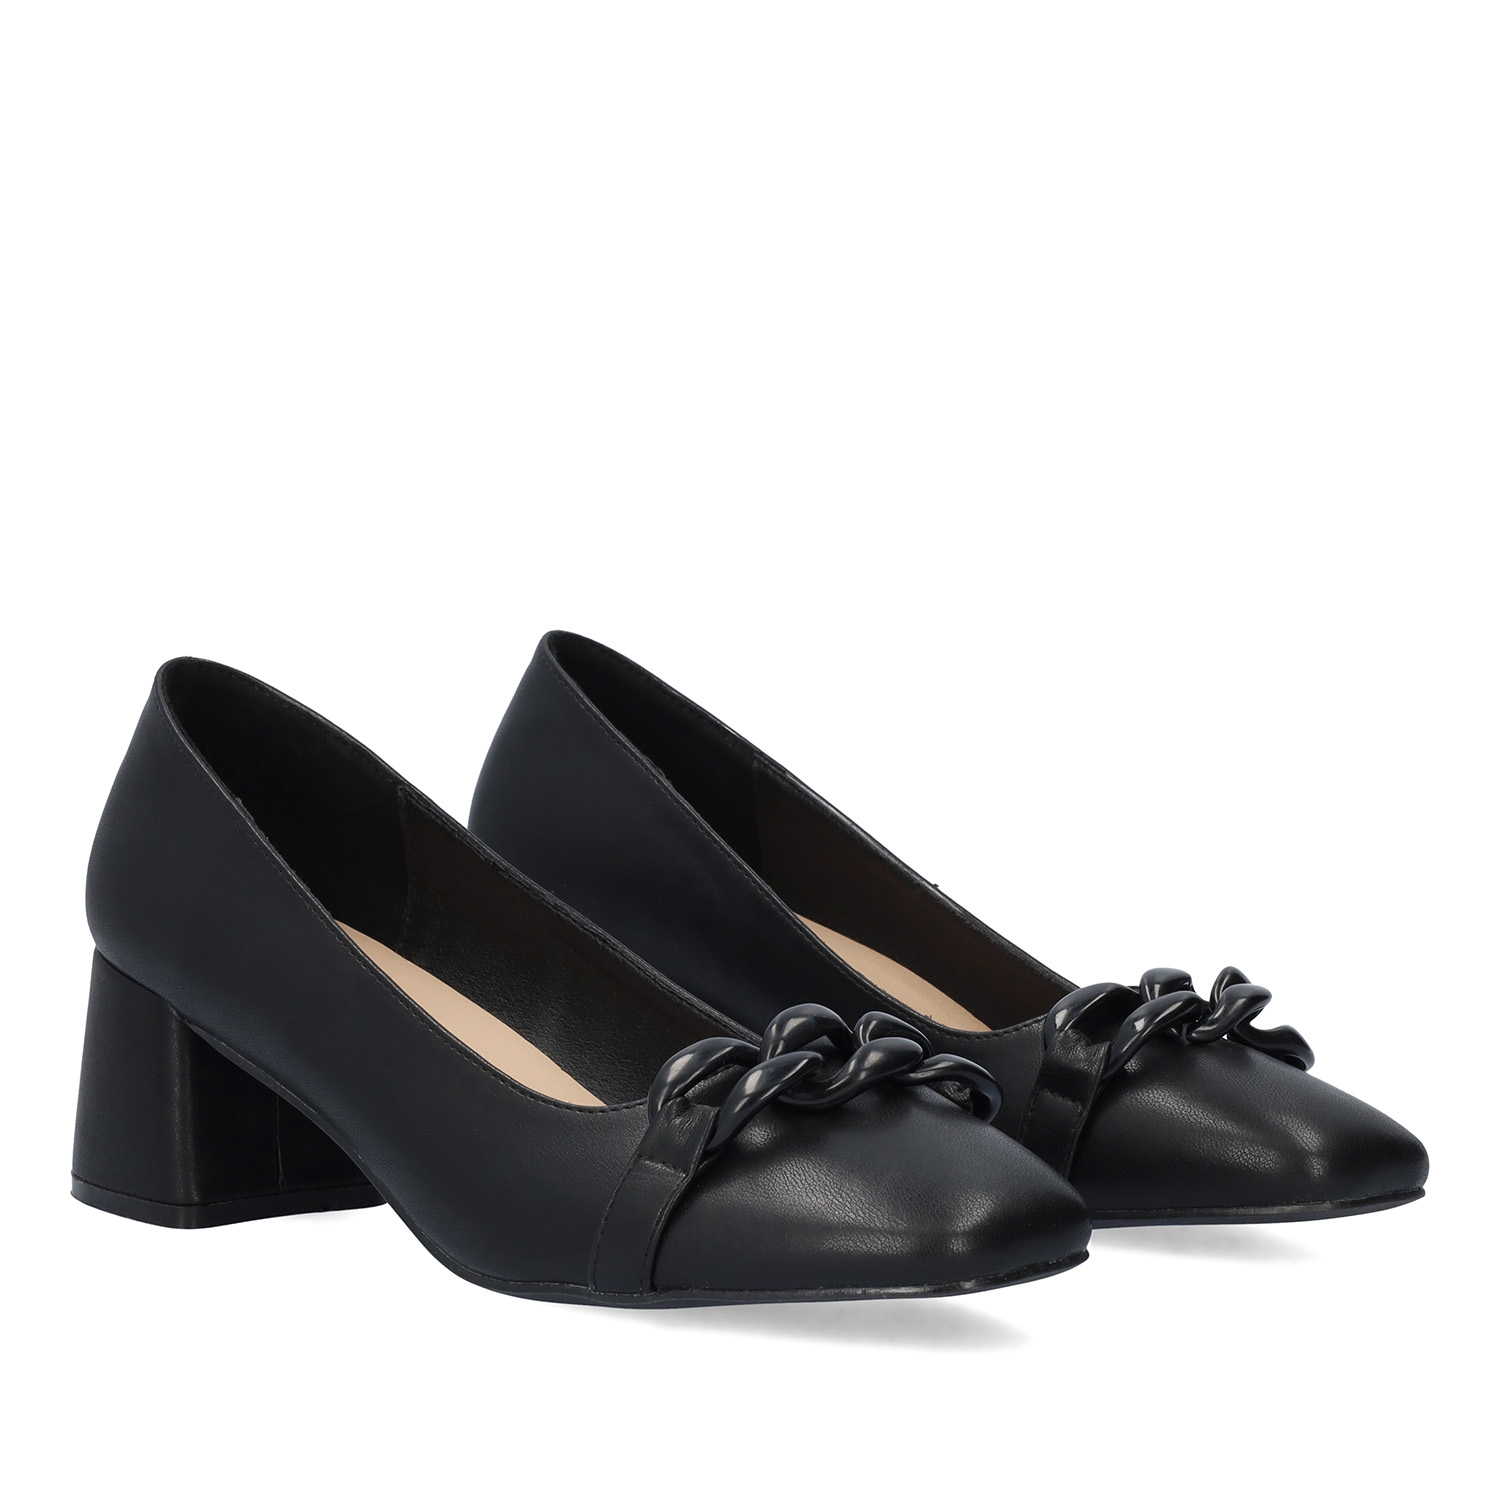 Heeled shoes in black faux leather 